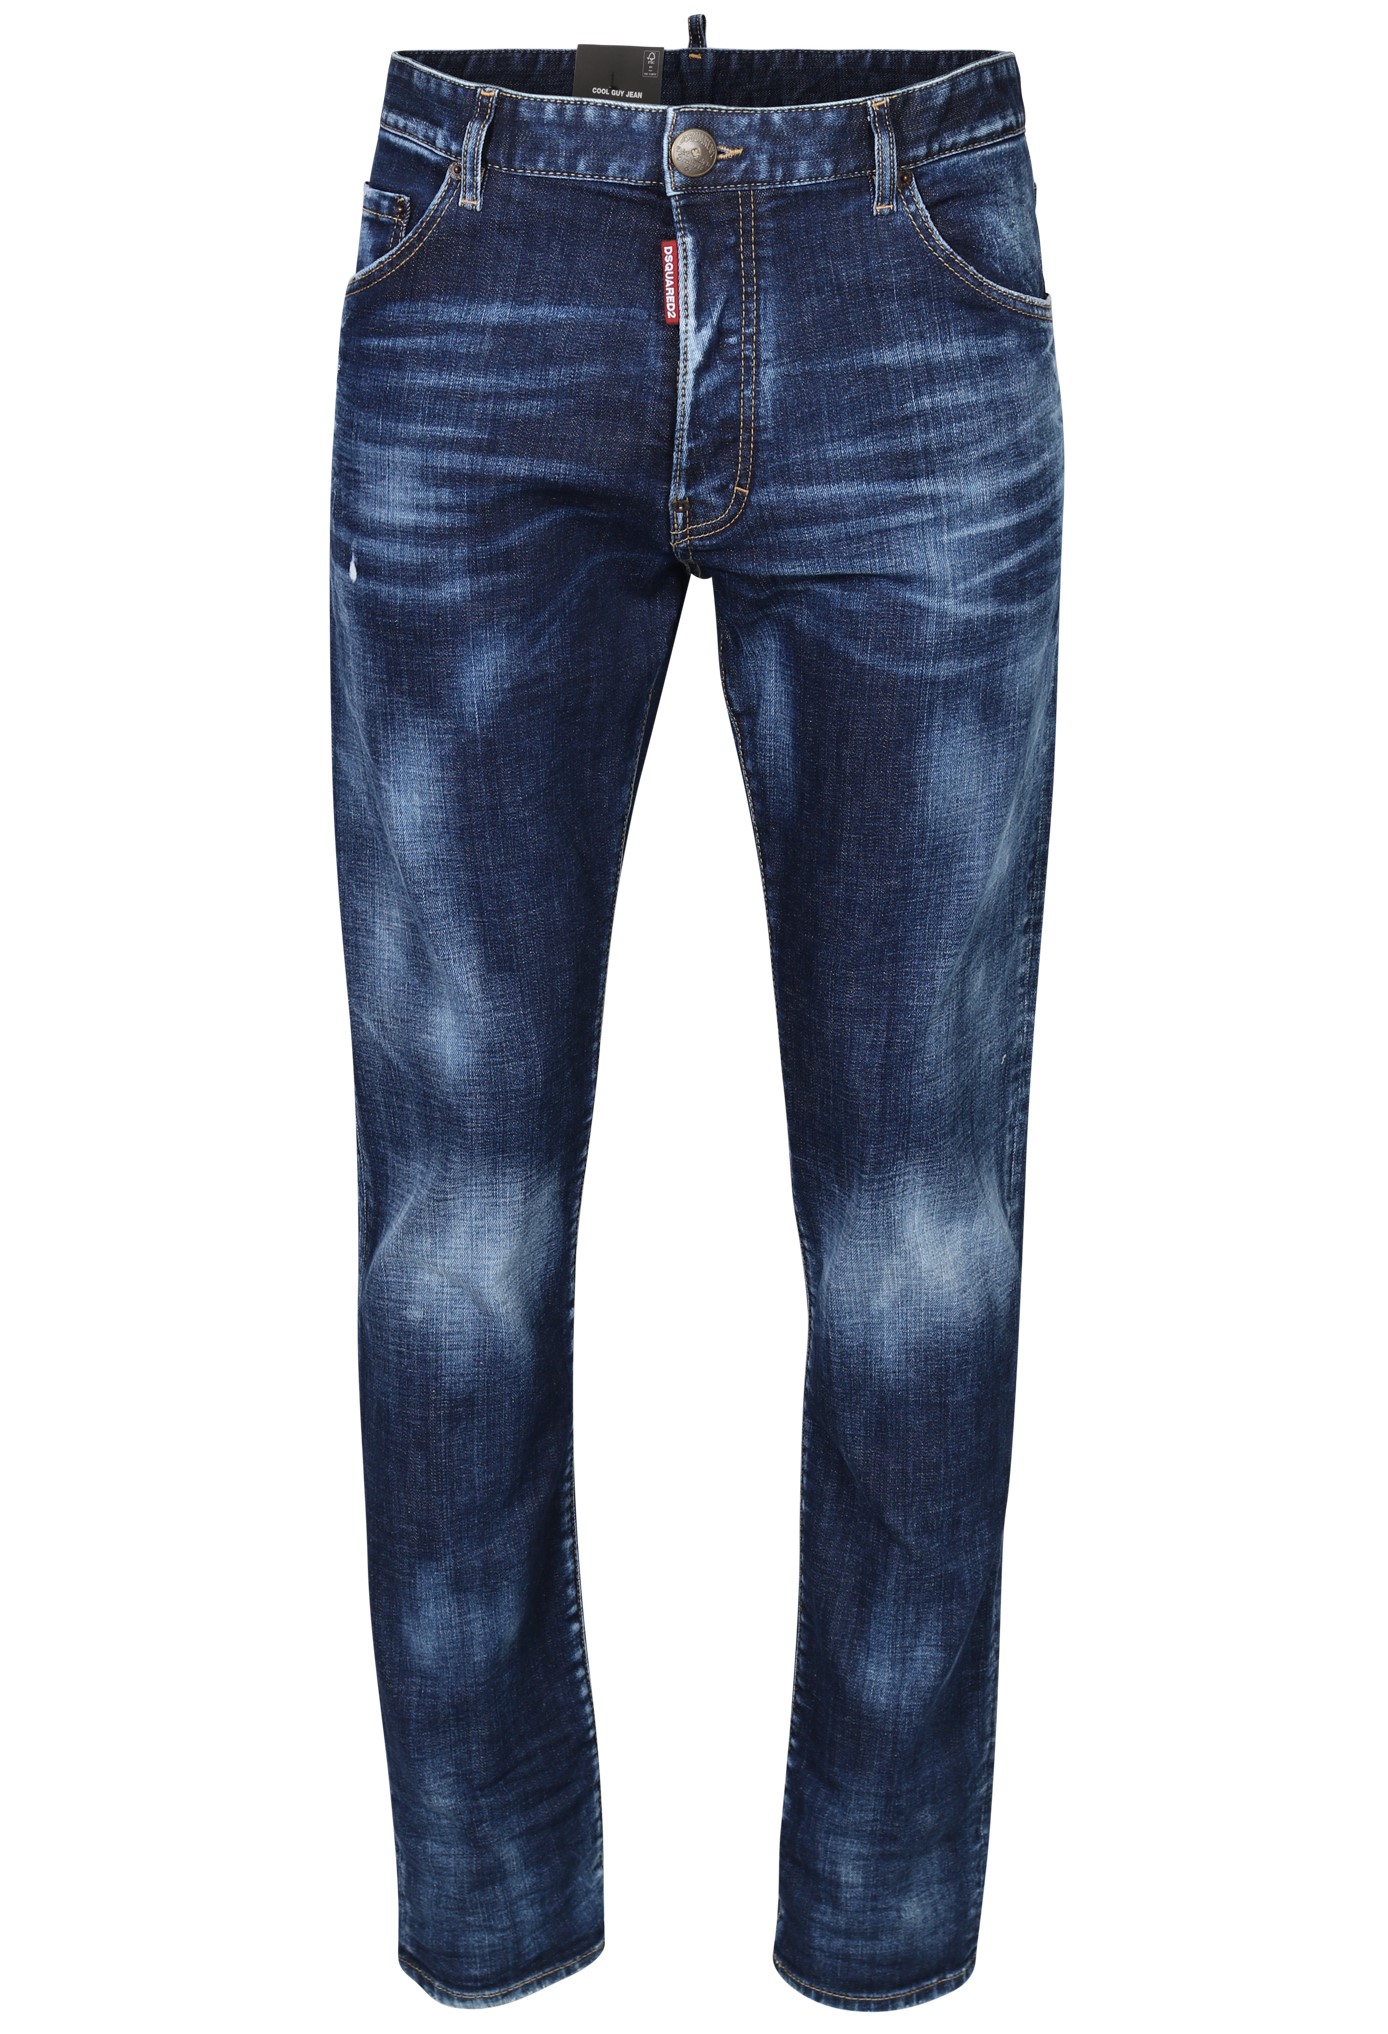 DSQUARED2 Cool Guy Jeans in Washed Dark Blue